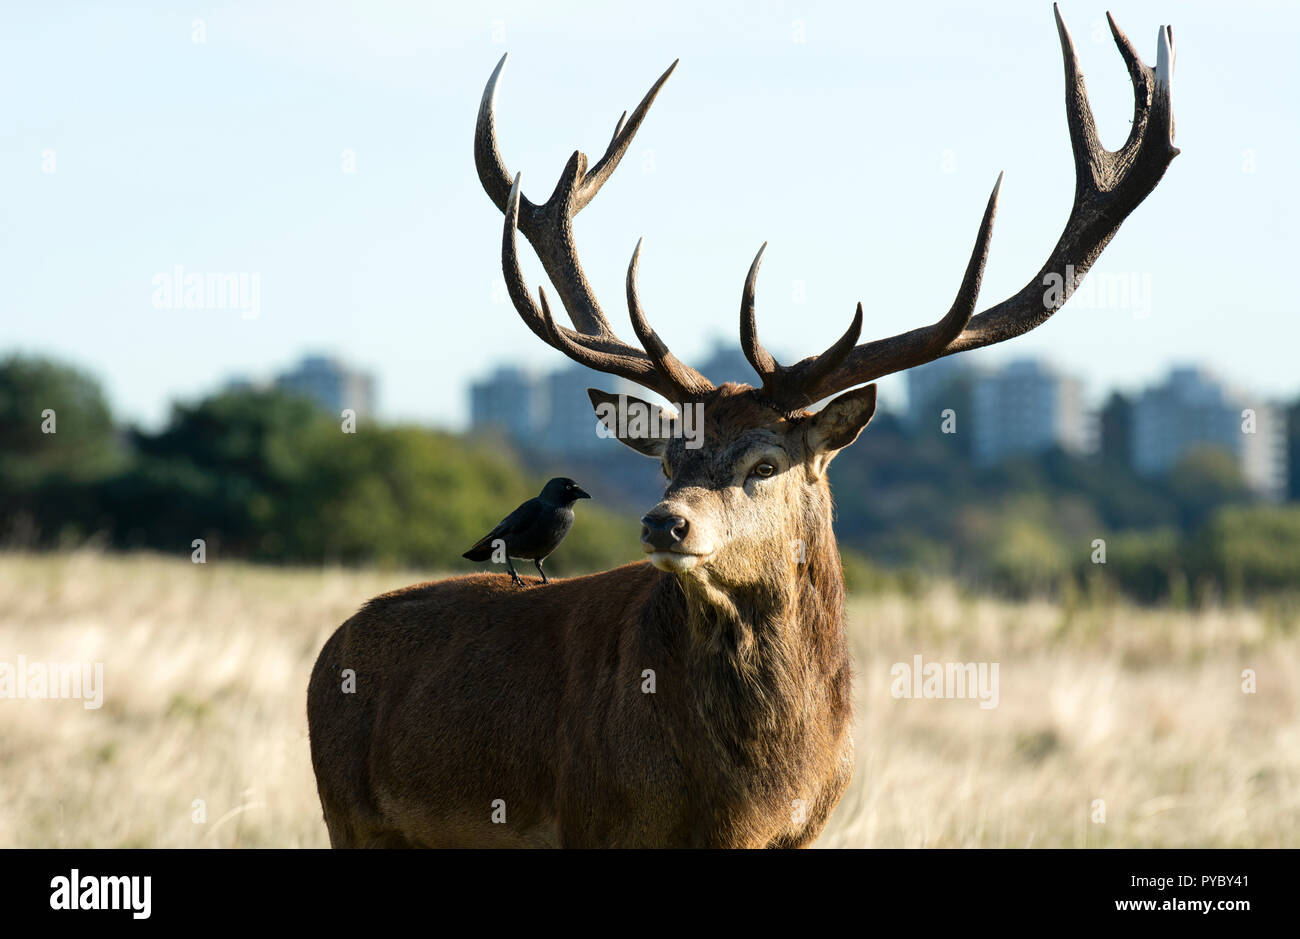 London,UK. 27 October 2018. A stag deer and crow in the autumn sun,Richmond park. Danny Link/Alamy live news. Stock Photo